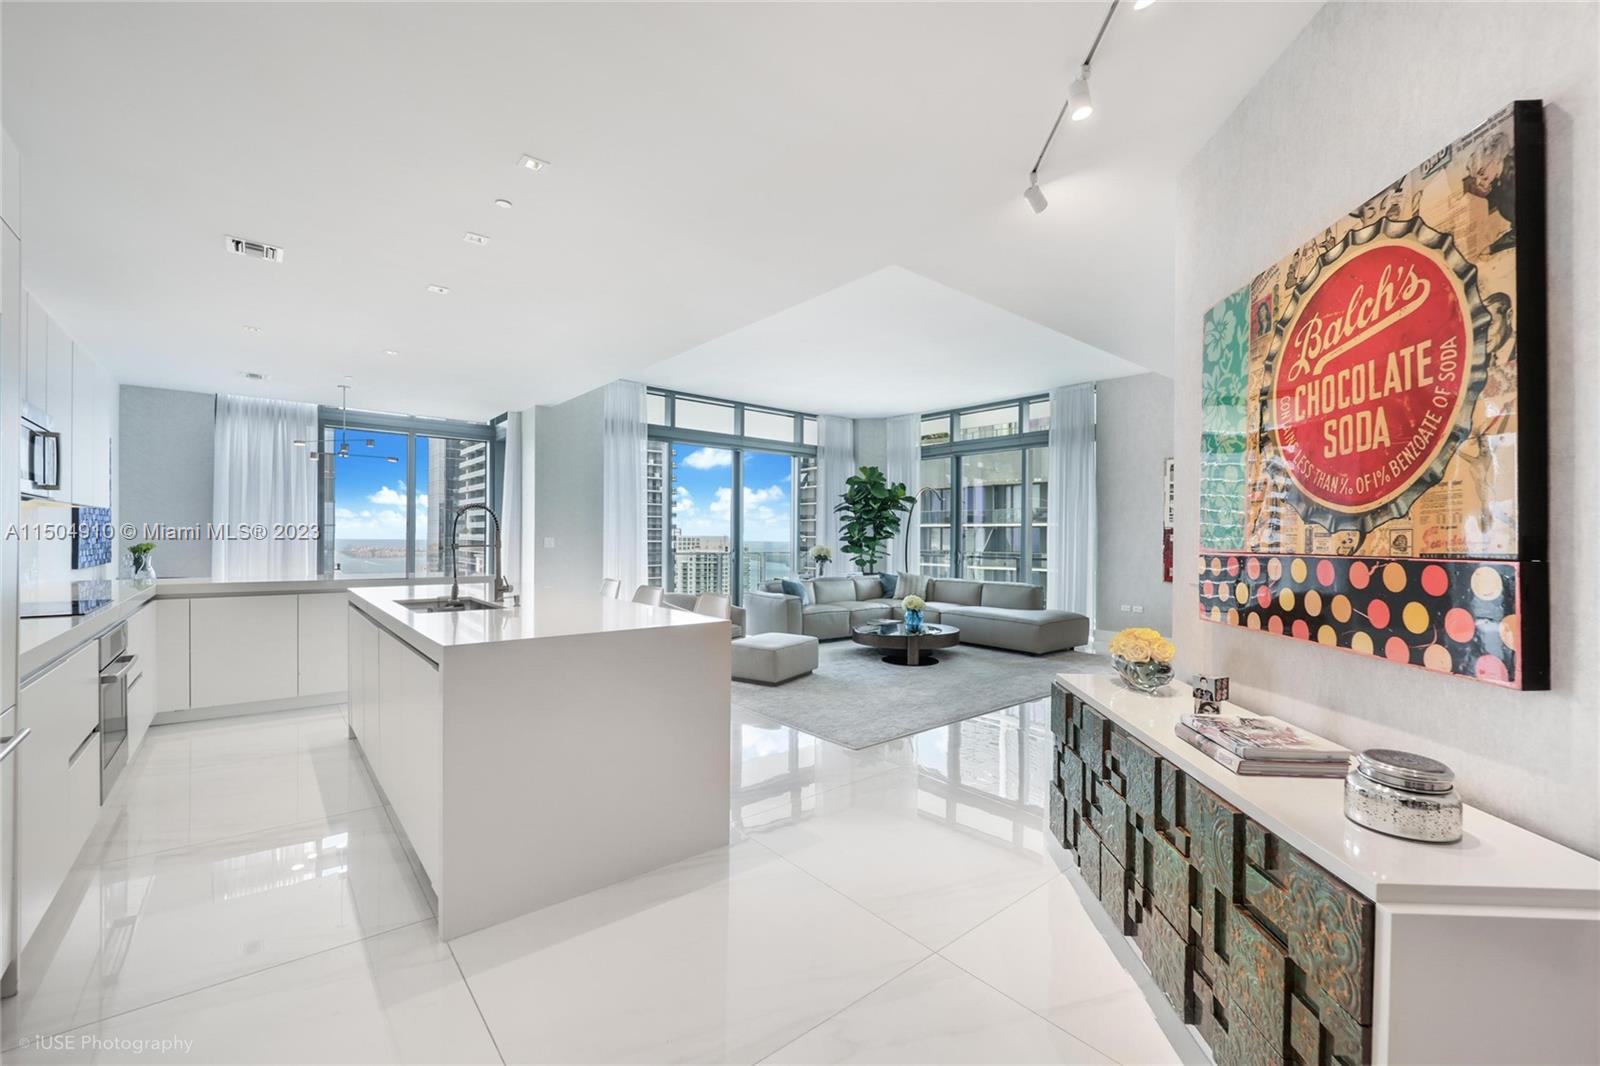 Stunning corner 4BR/4.5BA lower penthouse unit offering breathtaking panoramic water and skyline views from sunrise to sunset in the elegant Rise building adjacent to Brickell City Center Mall. 12' ceilings with 48"x48' white Italian porcelain floors throughout the unit and other upgrades recently completed in 2022. Custom Italian finishes throughout the apartment. Large wraparound 9ft deep balconies offering 360-degree views. Walk-in closets in every bedroom featuring Italian cabinetry. Electrical window treatments and white custom shades. Quartz counter kitchen tops with waterfall island and floating cabinetry in bathrooms. Large laundry room w/ additional storage and maid's room w/bathroom. The unit includes 2 parking spaces and free valet service for visitors.